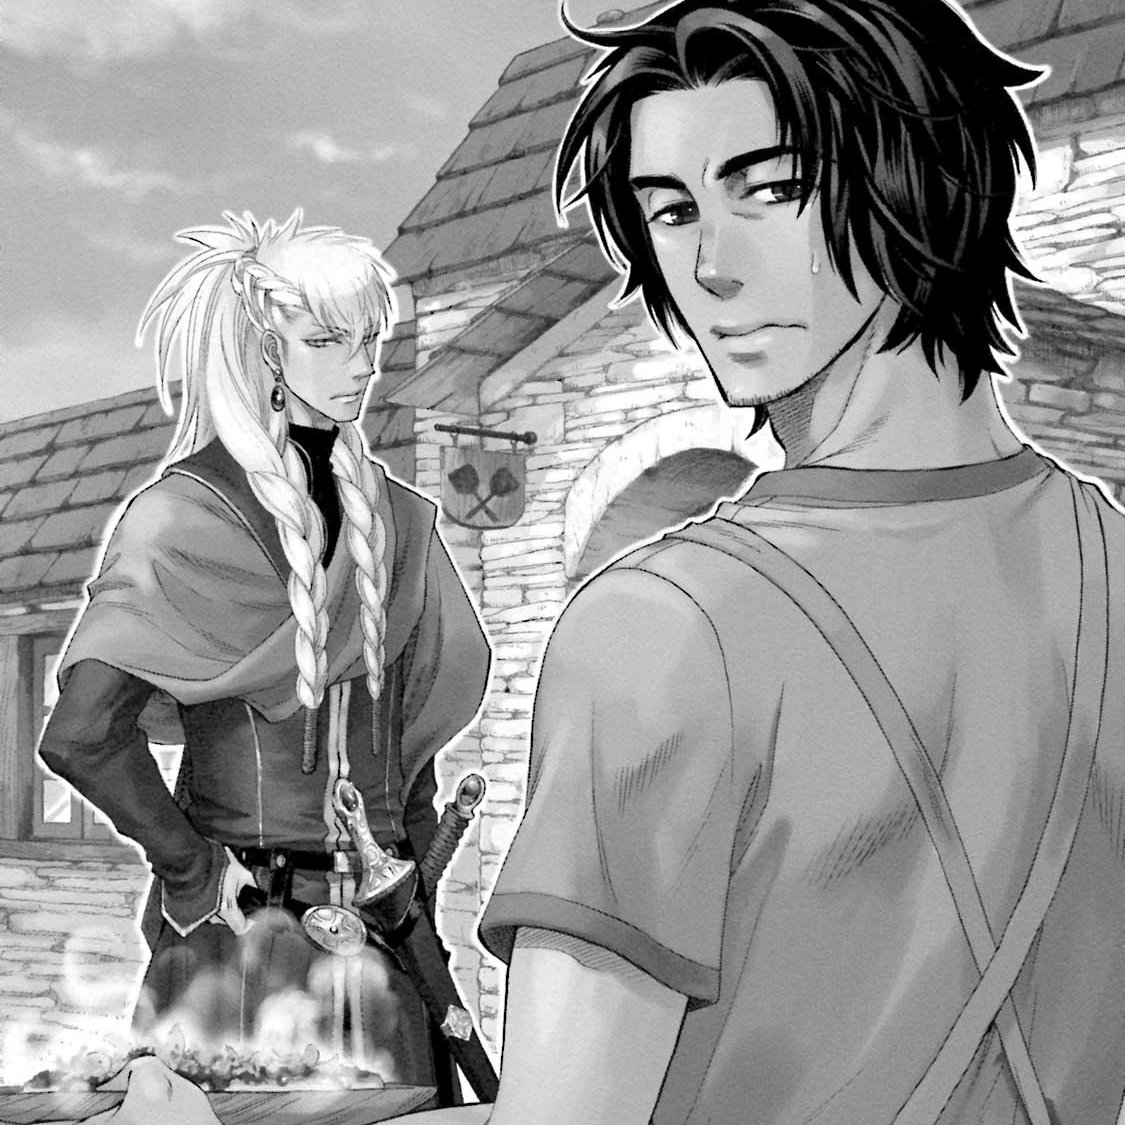 Today's  #Yaoi is, "Trip Lovers" Yasuda Yutaka is on his way home when he accidentally goes through a portal which suddenly appeared before him. It's been five years since then and he has a problem, Many suitors come knocking fixated on him for his black hair and eyes! #Manga  #BL